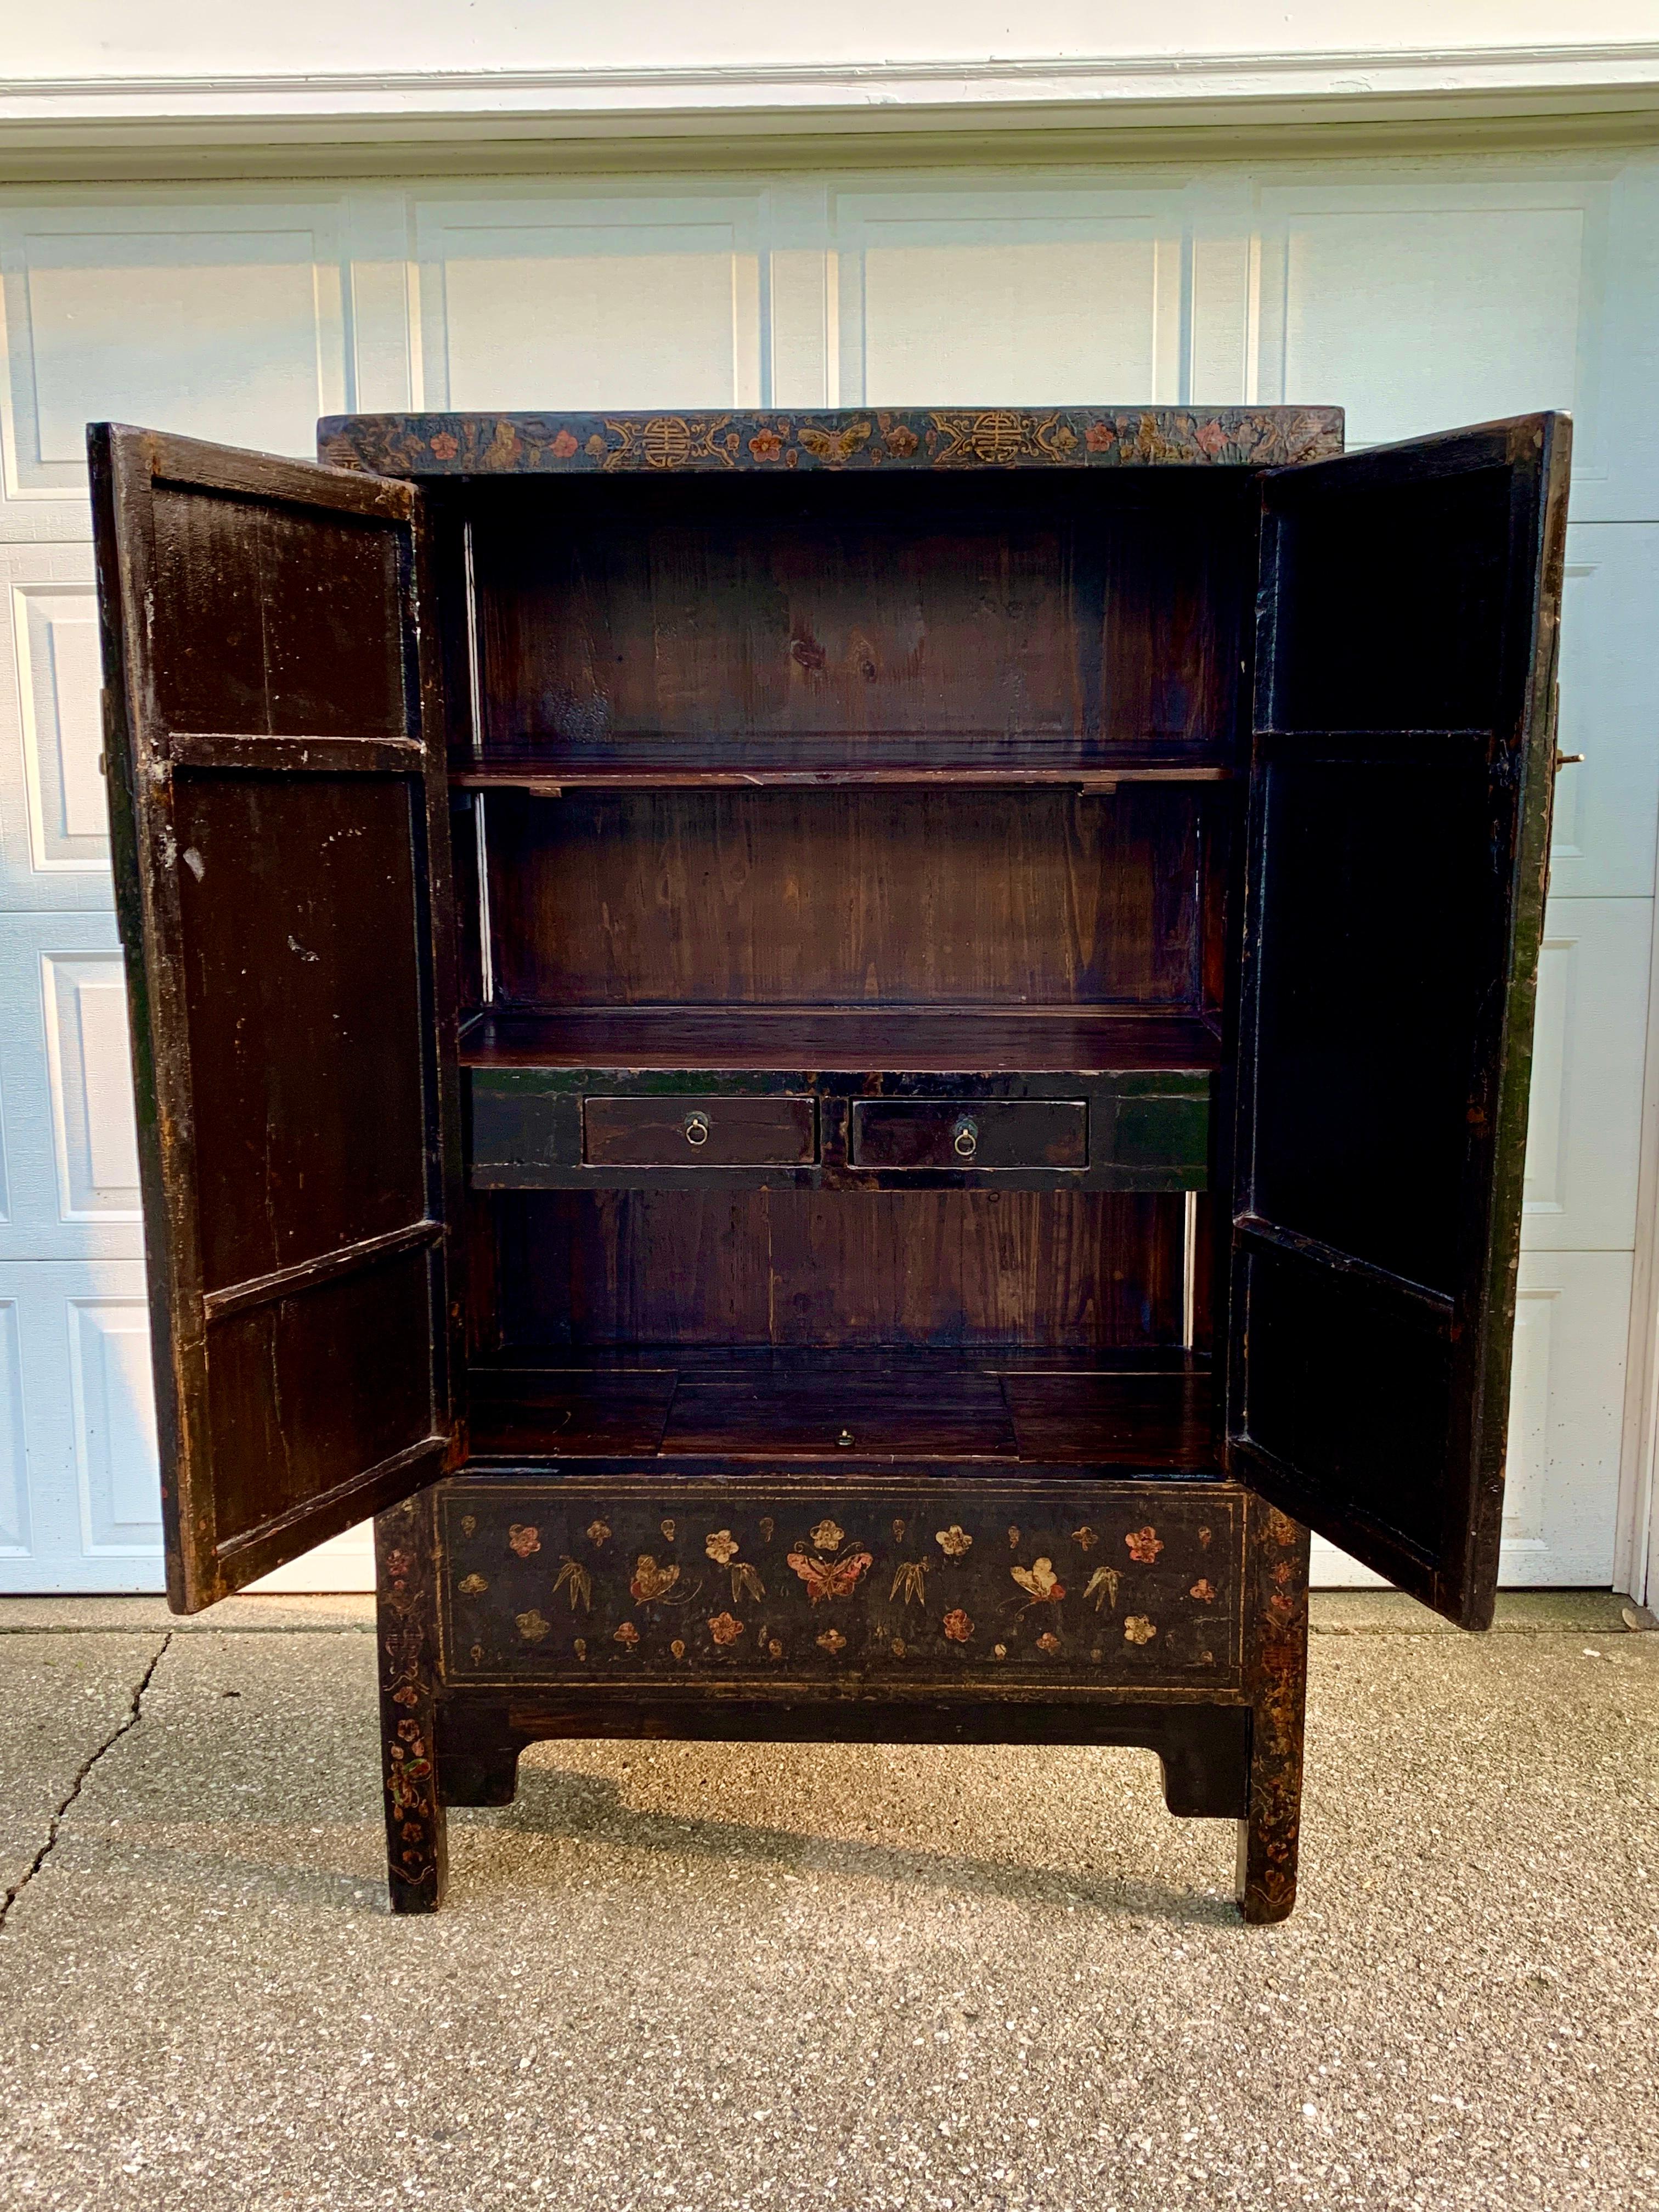 Antique Chinese Qing Dynasty Shanxi Painted Lacquer Cabinet, 19th Century For Sale 7